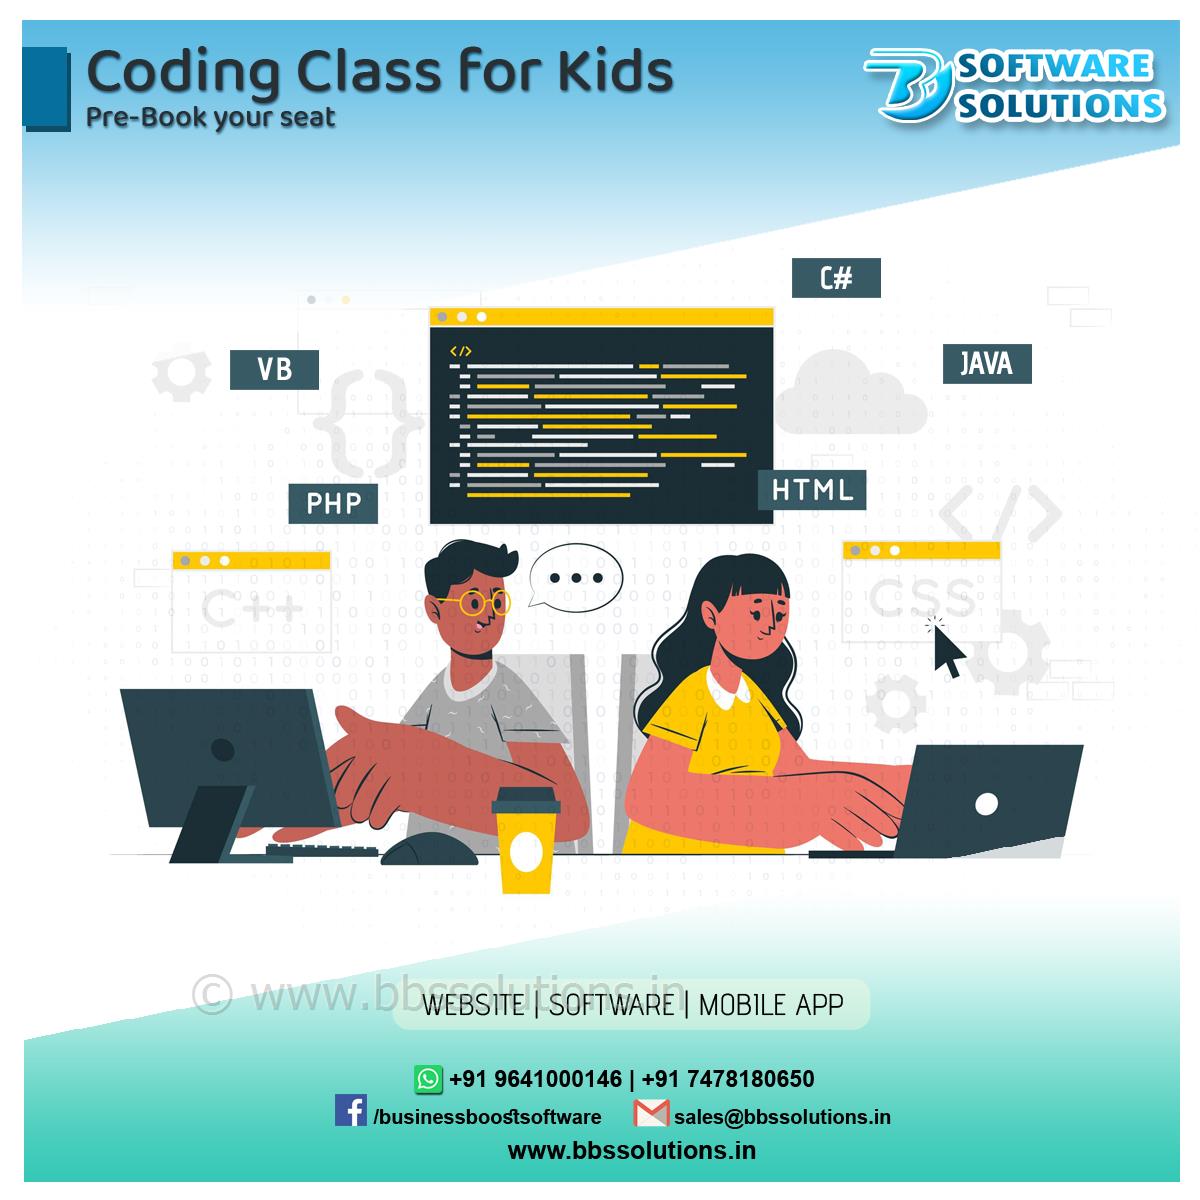 AI and Software Skill enhance education for Kids...  Business Boost Software Solutions do Best Software ,Web Development,Mobile App solutions provider in siliguri , india, WestBengal , Assam , Siliguri , Jalpaiguri ,Dhupguri,
    Best website designing in Siliguri with affordable packages and quick support. Get effective website design in Siliguri from best website designers. #bbssolutions , #SEO  , #DigitalMarketing  , #WebDesign  , #SoftwareDevelopment  , #FacebookAds  , #GoogleAds  , #GoogleSEO  , #WebsiteDesigning 
     , #Software  , #website  , #BusinessBoostSoftwareSolutions  , bbssolutions,SEO, Digital Marketing, WebDesign, Software Development, Facebook Ads, Google Ads, Google SEO, Website Designing, 
    Software, website, Business Boost Software Solutions, 9641000146,7478180650,best GST software in West bengal,Best GST software company in north bengal,GST solution in west bengal
    ,gst solutions in north bengal,best customize software in siliguri , india,best customize software in west bengal,best customize software in dhupguri,news portal website in west bengal
    ,news portal website in siliguri , india,regional news portal website in siliguri , india,school software in west bengal,school software in north bengal,school website in north bengal,
    school software in north bengal,android app, ios app, ecommerce website, ecommerce software,Web designing, website designing, ecommerce website, how to make website, create website, 
    website development company, web page design, seo, search engine optimization, seo siliguri , india , 
    seo company, best seo company, seo services, responsive web design, web designing companies, 
    how to create a website, internet marketing, digital marketing, online marketing, social media marketing, 
    promotion,web designing in Siliguri,web designing in Siliguri siliguri , india,web designing in siliguri , india,GST Software  ,  GST Billing Software  ,  GST Accounting  ,  GST Ready Software,
    software company in siliguri,software company in siliguri siliguri , india,software company in north east siliguri , india,
    school software in siliguri,school software in north east siliguri , india,customize software,free software demo,
    reasonable price software,cost effective software,resonable price software,free demo software,free software,best software support,free software support,best software company in siliguri , india,
    best software company in siliguri,MLM Software company in Siliguri,Binary Software company in Siliguri,
    top ten software company in north bengal,top ten software company in siliguri,top ten software company in siliguri , india,
    top ten software company in north east,software development siliguri , india,west bengal,kolkata,siliguri , software company in siliguri , india
     , software development west bengal , Customized software siliguri , india , software for hotel,medicine distributors,
    jewellery shop , best software company in siliguri,jalpaiguri,sikkim,darjeeling  , Business Boost Softwate Solutions  ,  
    Web designing company in siliguri  ,  ecommerce designing company in siliguri  ,  web development company in siliguri  ,  
    software development comapny in siliguri  ,  software development in sikkim  ,  website designing company in sikkim  ,  
    SEO service in sikkim  ,  web designing company in siliguri  ,  web designing compnay in North Bengal  ,  
    SEO service in siliguri  ,  web designing in north bengal  ,  web designing in north east siliguri , india , website designing in siliguri, best website designing in siliguri, web design, web designer in siliguri, web designing company siliguri